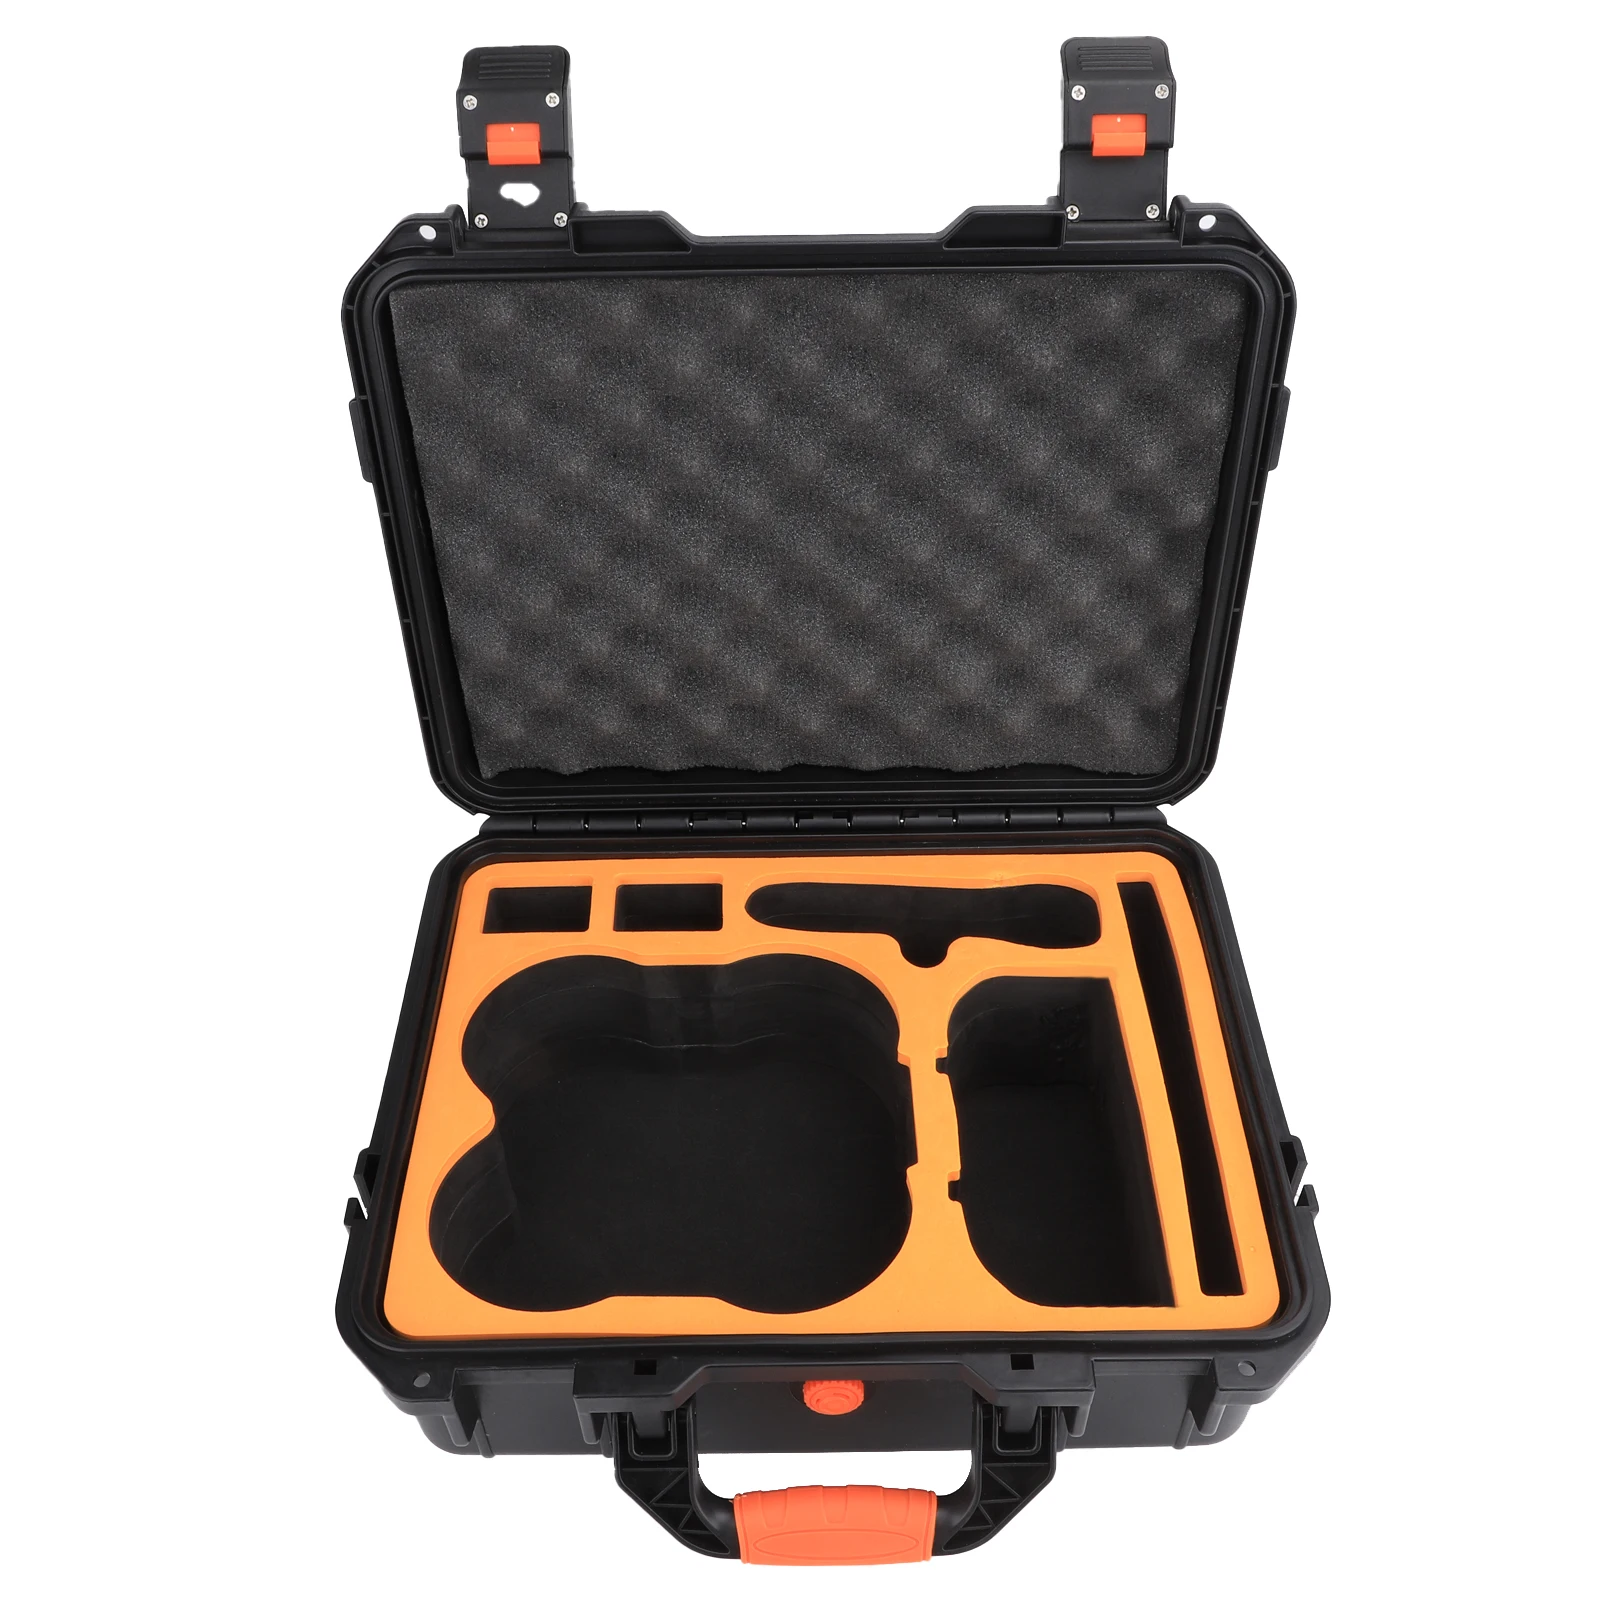 Drone Explosion Proof Case Portable Waterproof Box Hard Shell Case for DJI Avata Drone Accessories enlarge